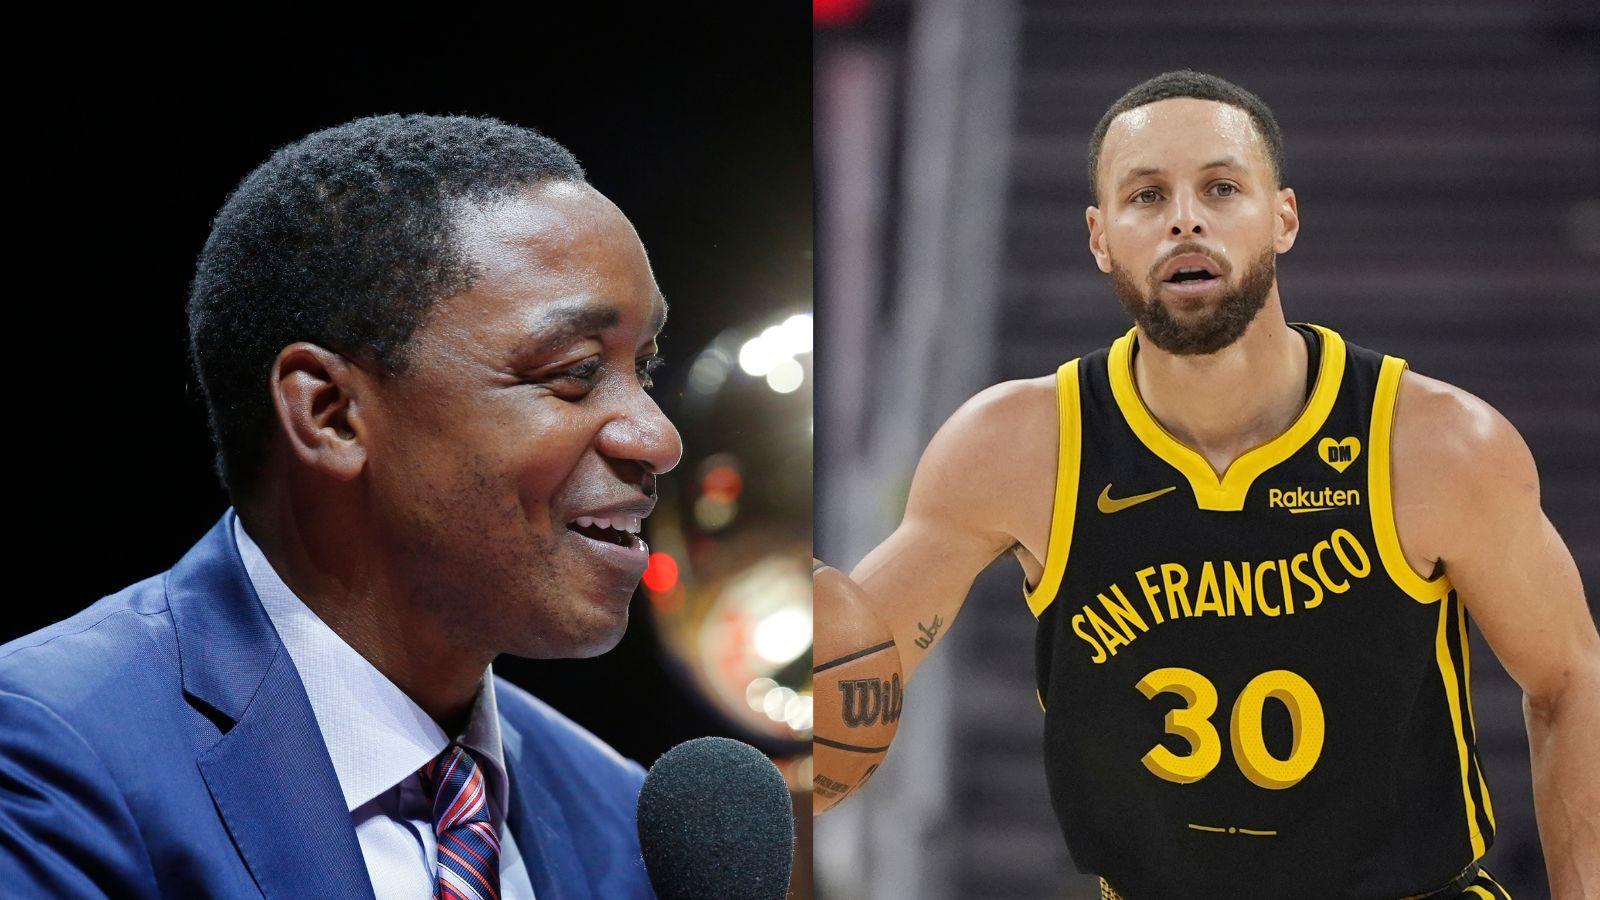 Isiah Thomas (left) and Stephen Curry as a ember of the Golden State Warriors (right).